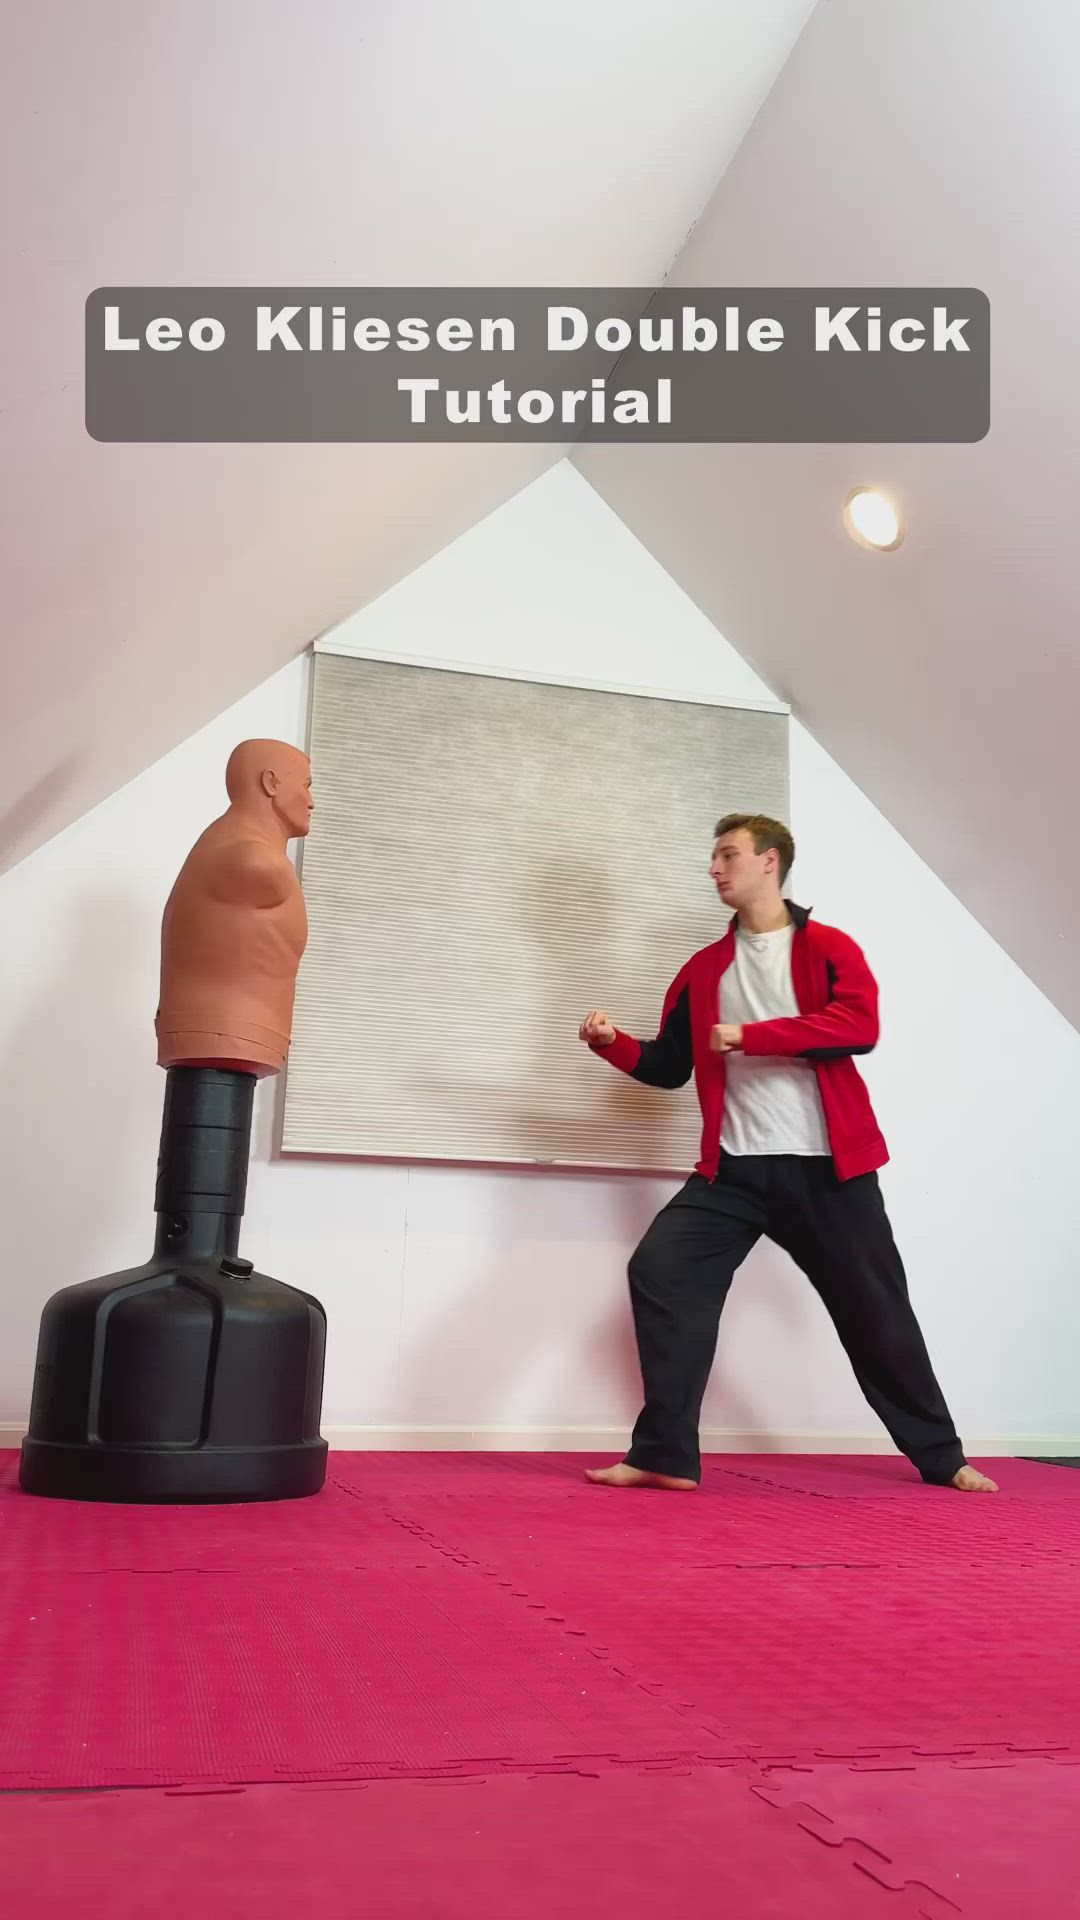 This may contain: a man doing a kick in front of a dummy